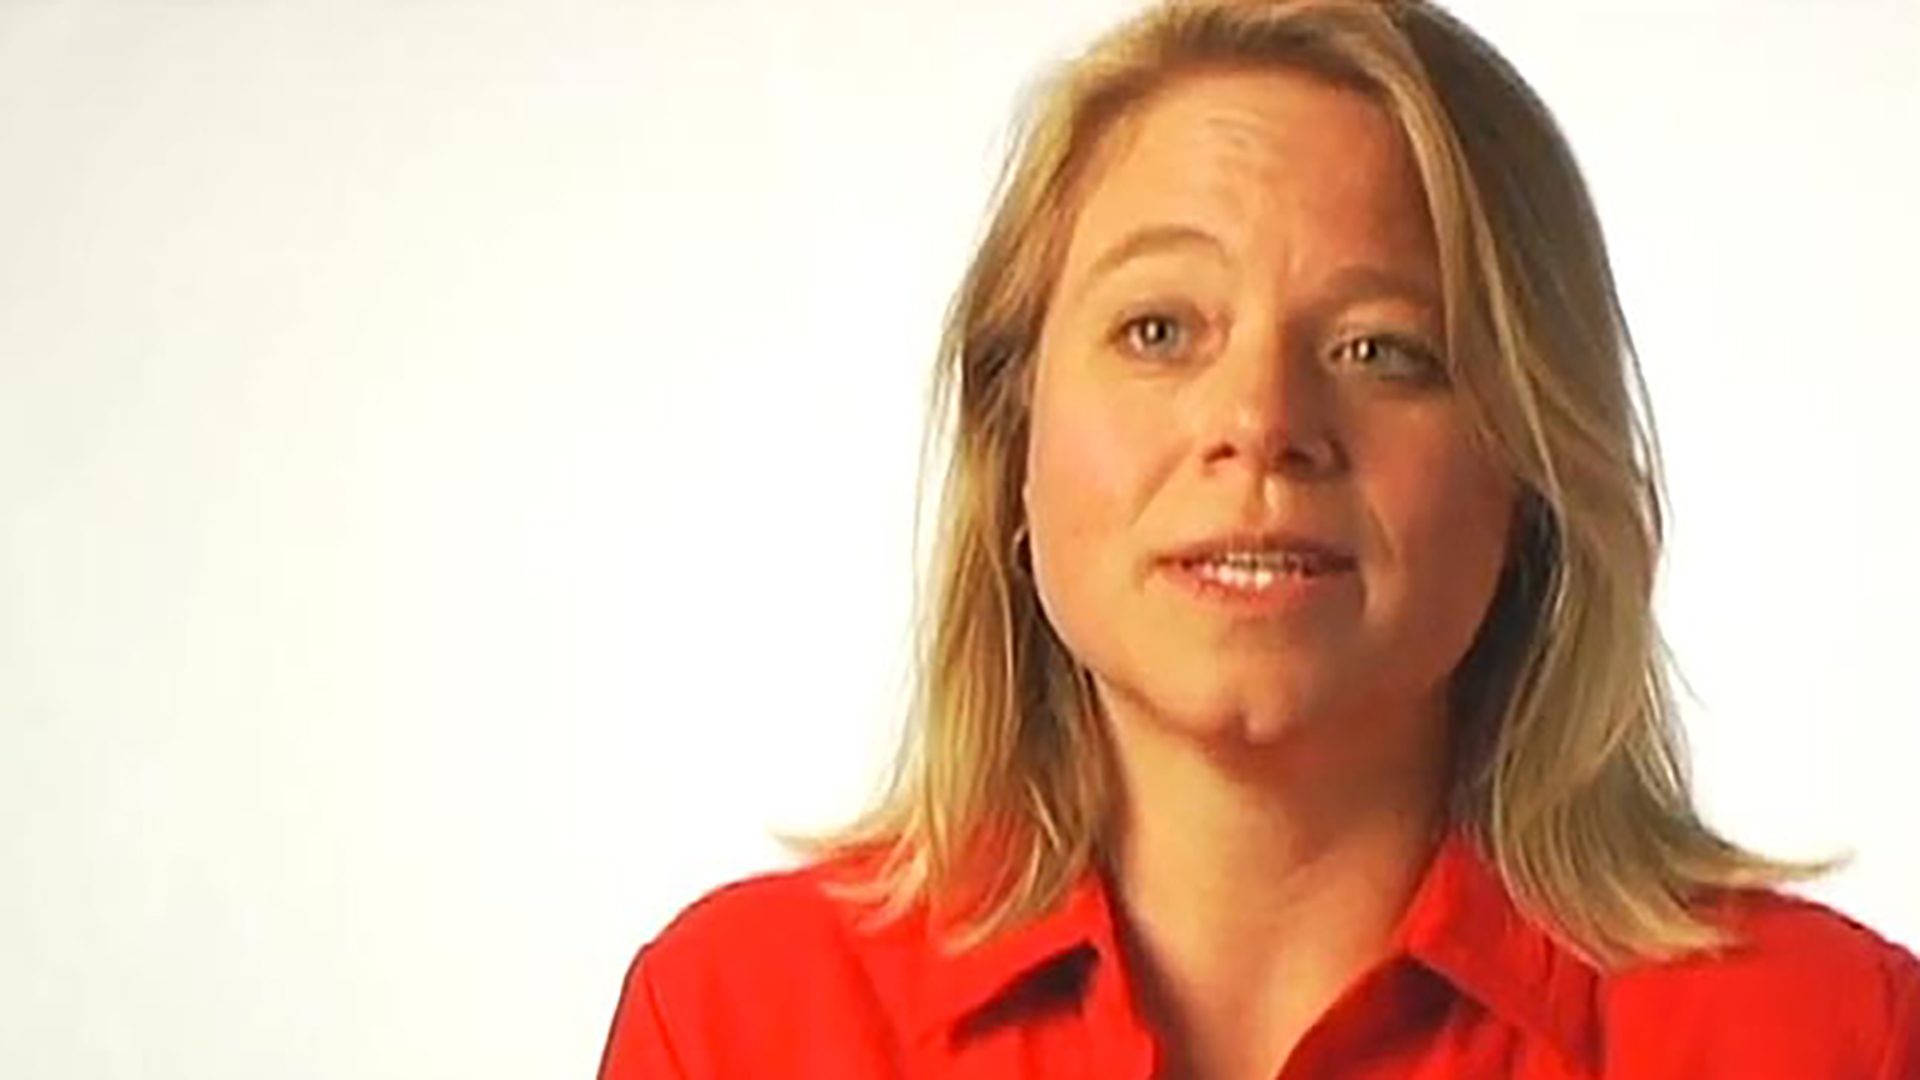 A blonde woman wearing a red shirt being interviewed against a white background